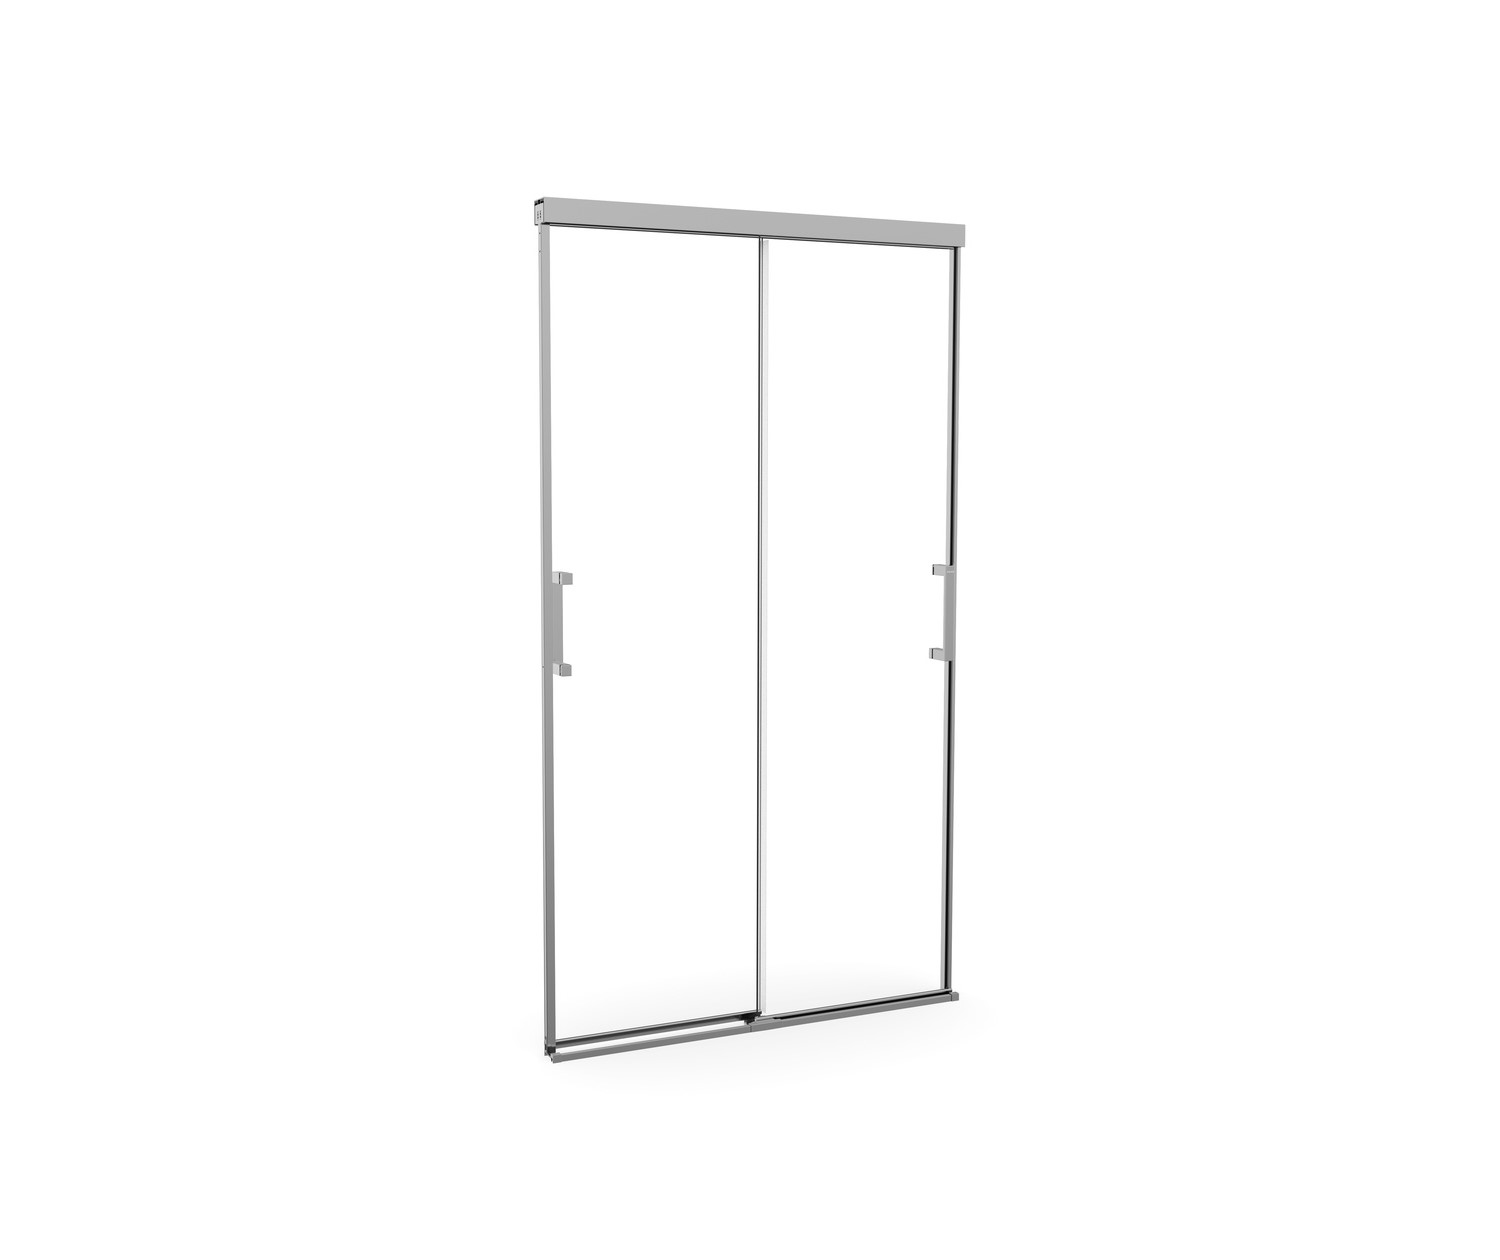 Incognito 74 39-42 x 74 in. 8mm Bypass Shower Door for Alcove 